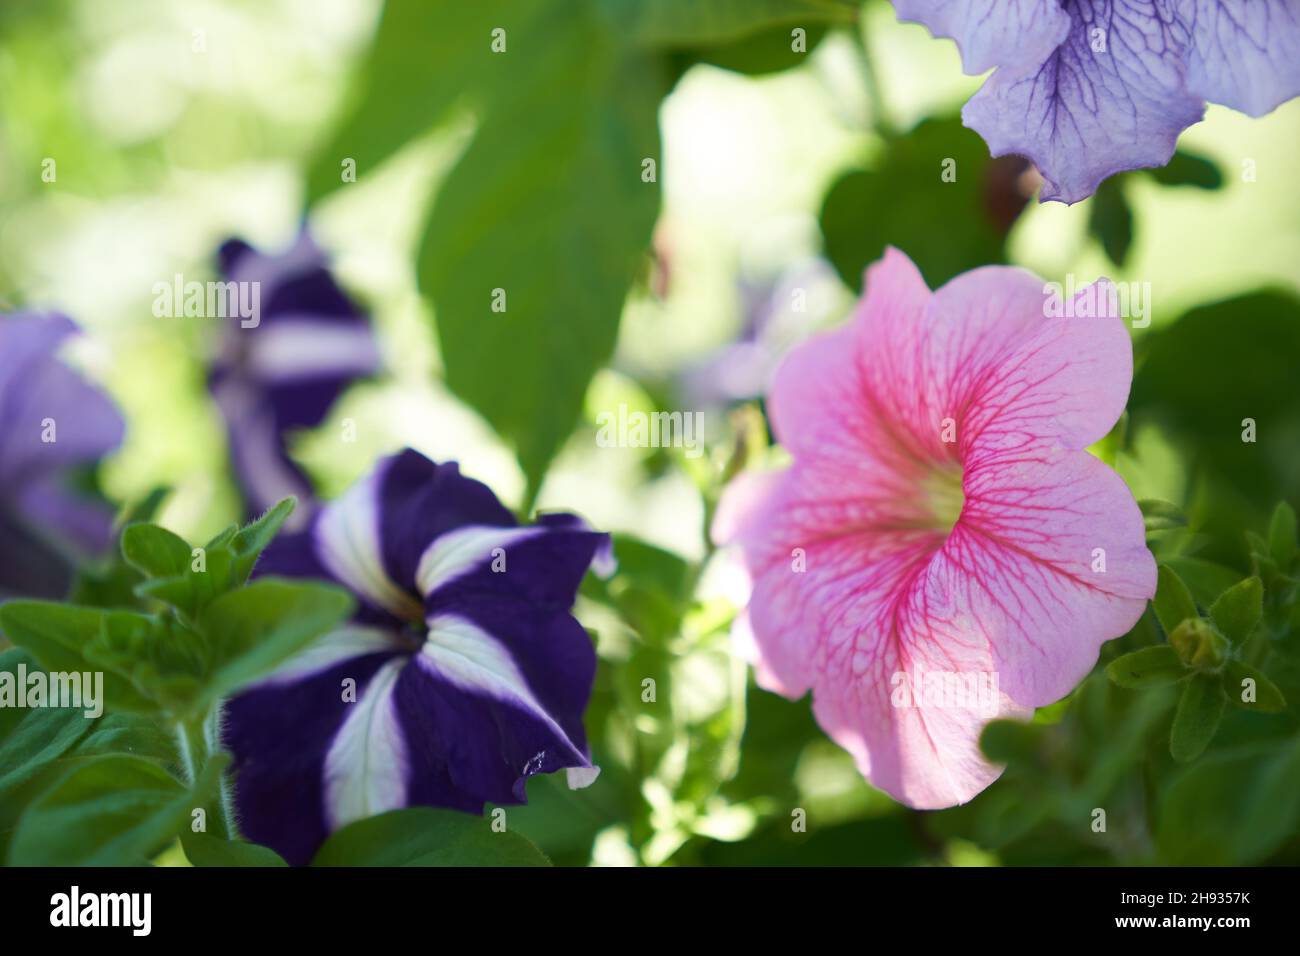 Beautiful garden flowers of petunia, purple and pink in nature close-up macro. Space for copying. An airy artistic image. High quality photo Stock Photo